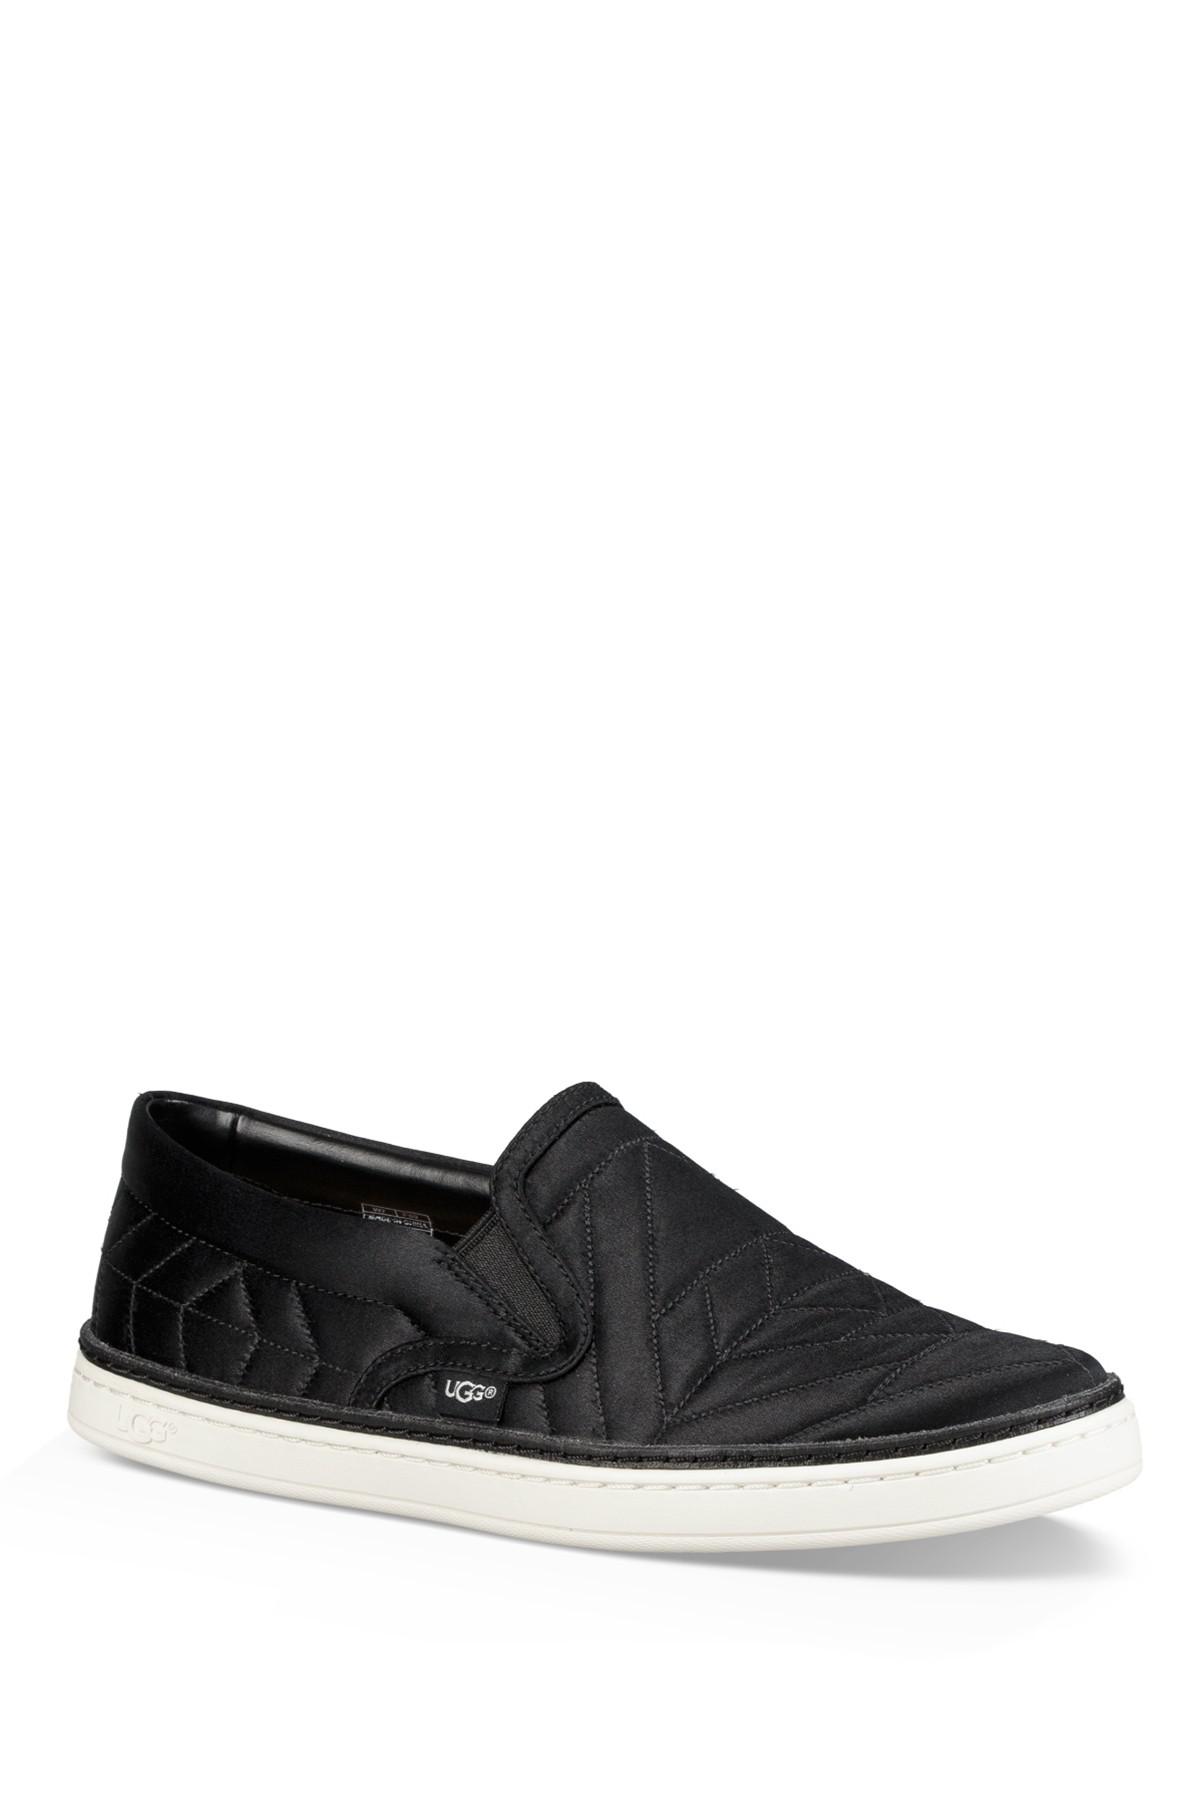 UGG Leather Soleda Quilted Sneaker in 